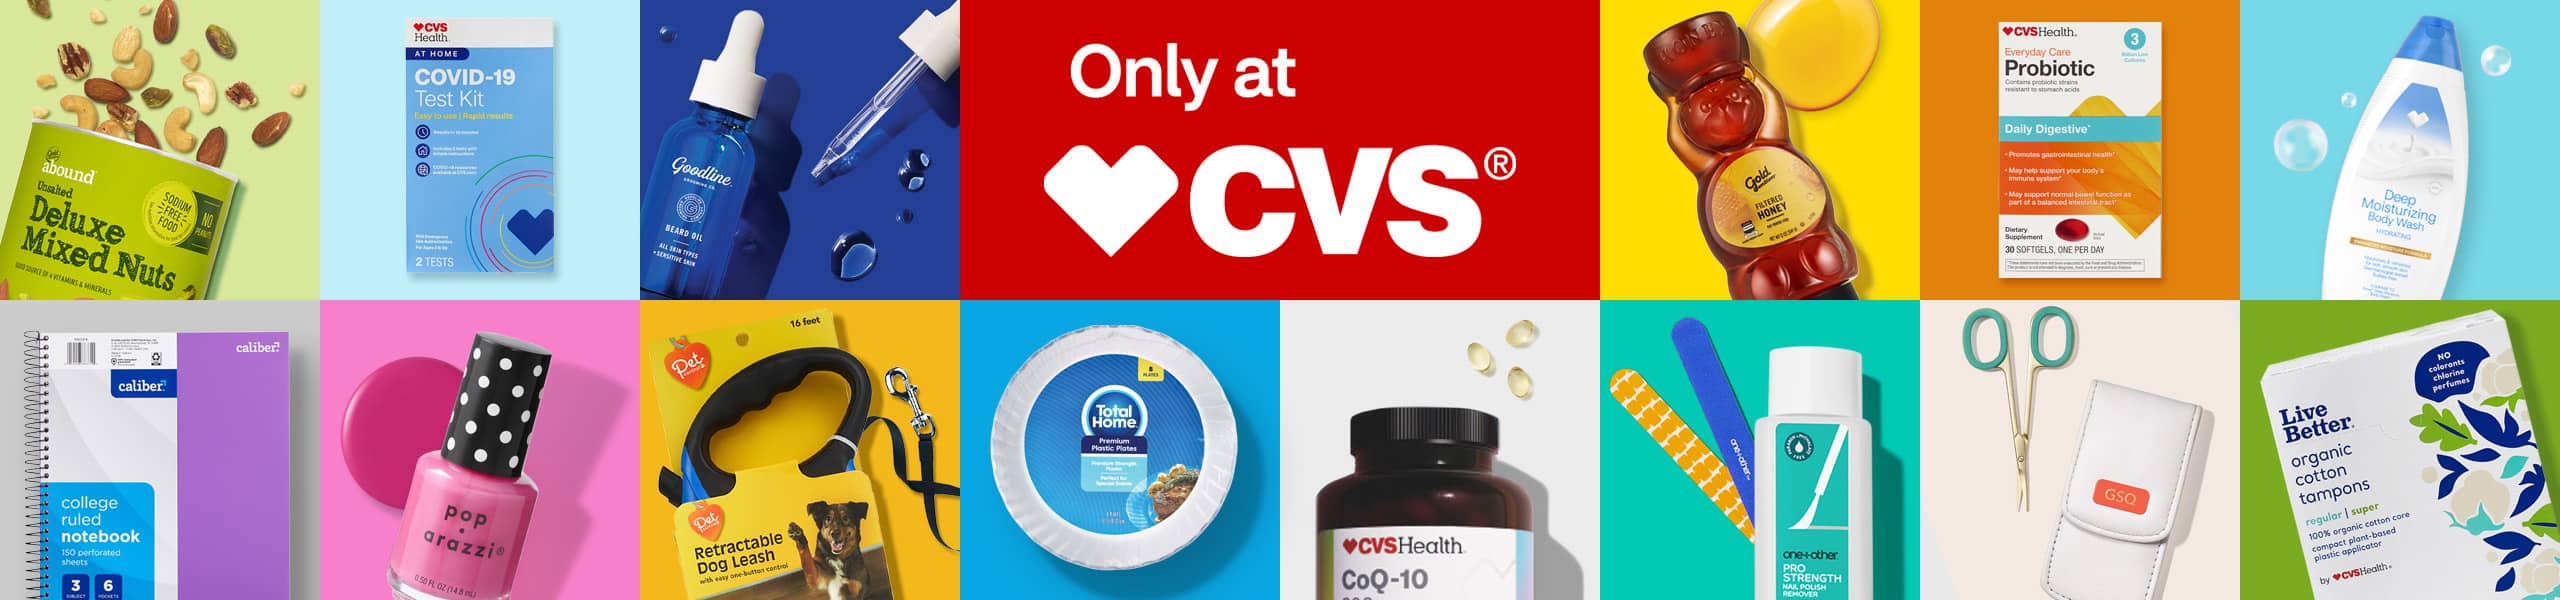 Only at CVS, a collage of products from our CVS brands, including Gold Emblem, Goodline, Caliber, Pop-arazzi, Pet Central, Total Home, one+other, GSQ and Live Better